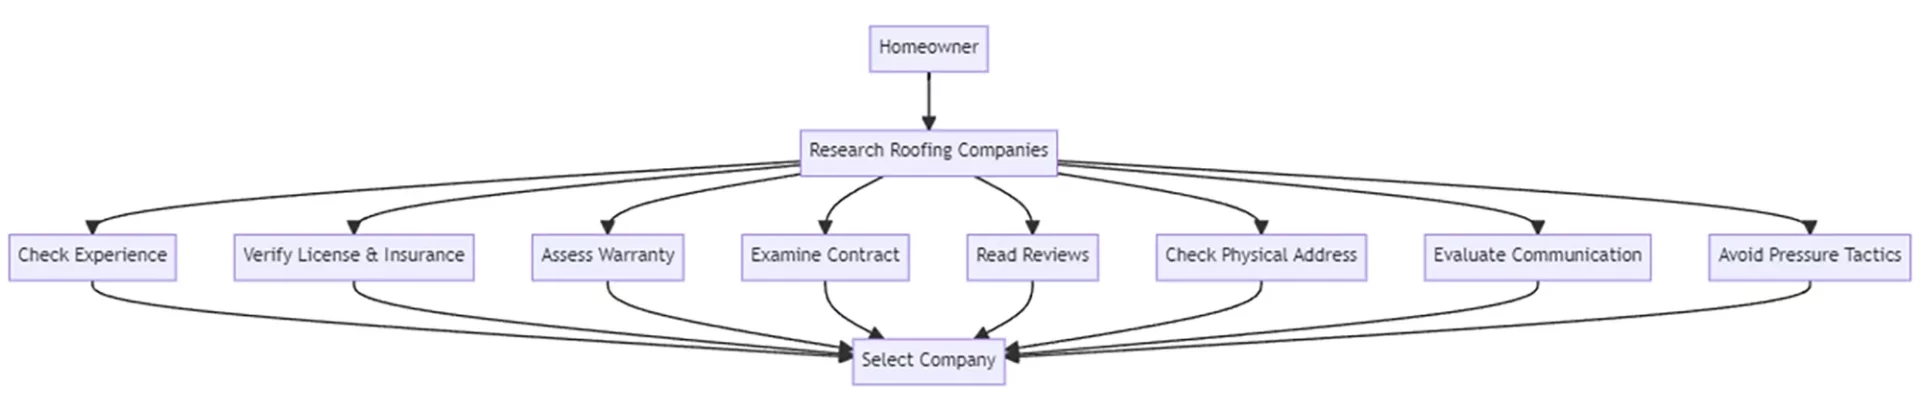 Identify Roofing Companies to Avoid Flowchart